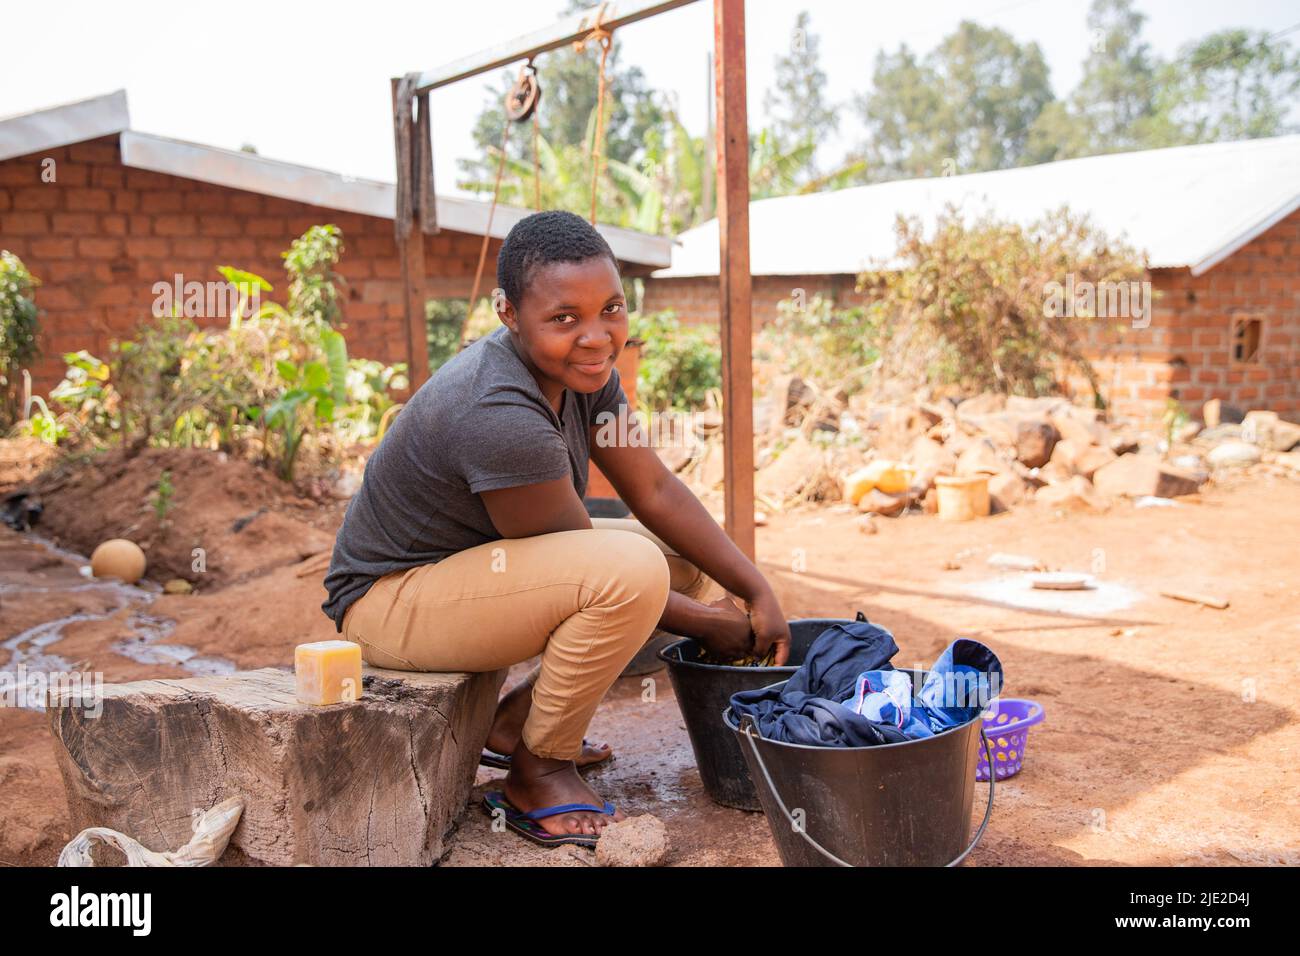 https://c8.alamy.com/comp/2JE2D4J/young-african-girl-washes-clothes-outside-with-laundry-soap-and-a-bucket-2JE2D4J.jpg